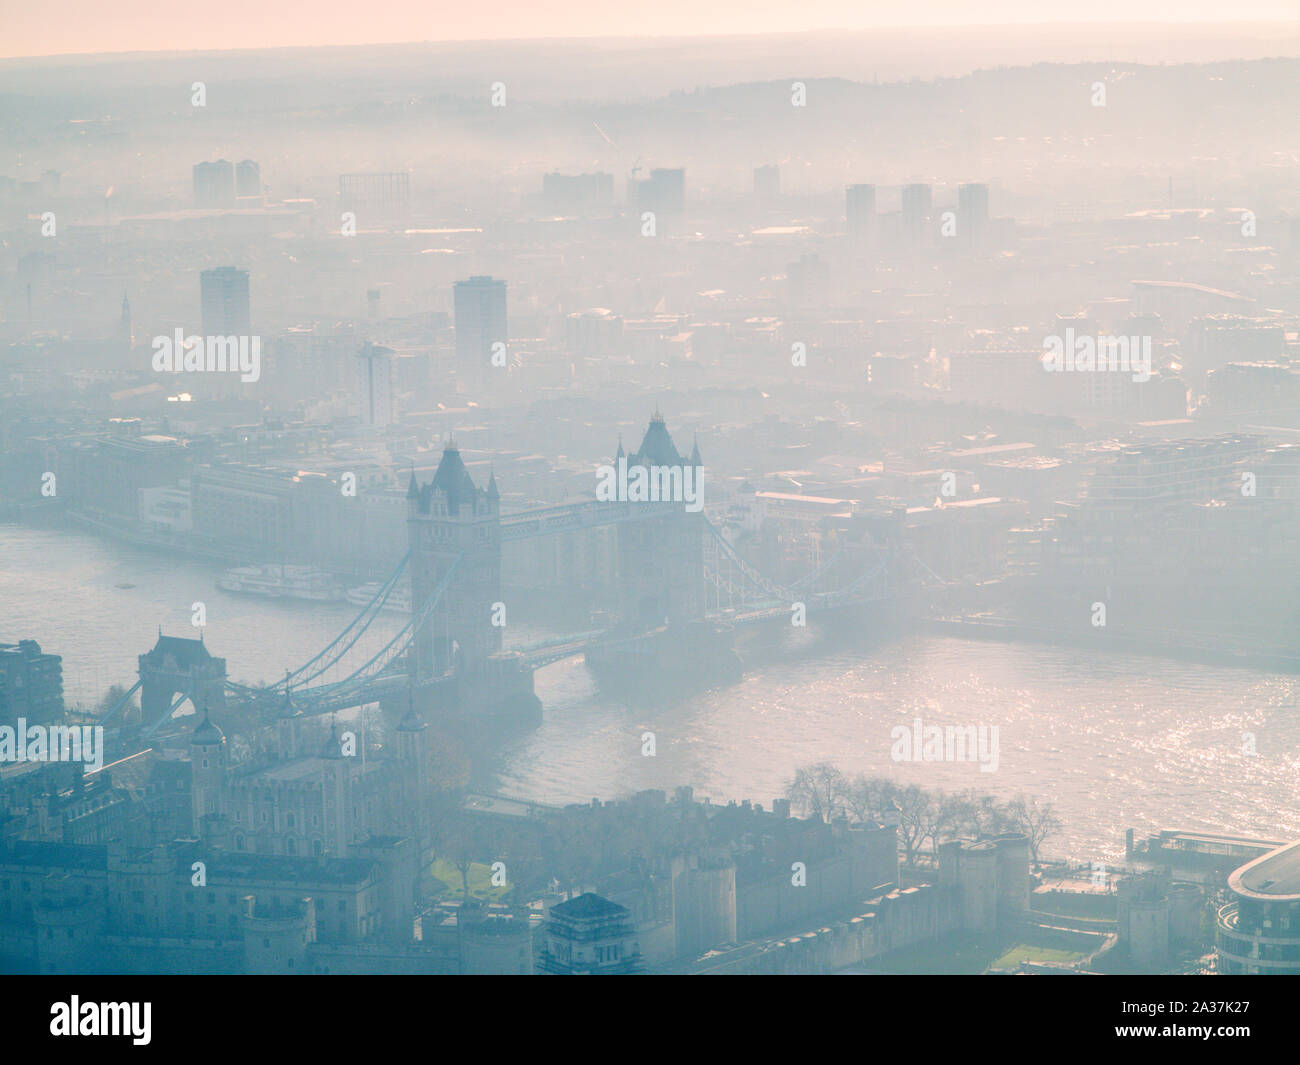 Dramatic shots of Tower Bridge and south London on a smoggy morning from high above Stock Photo